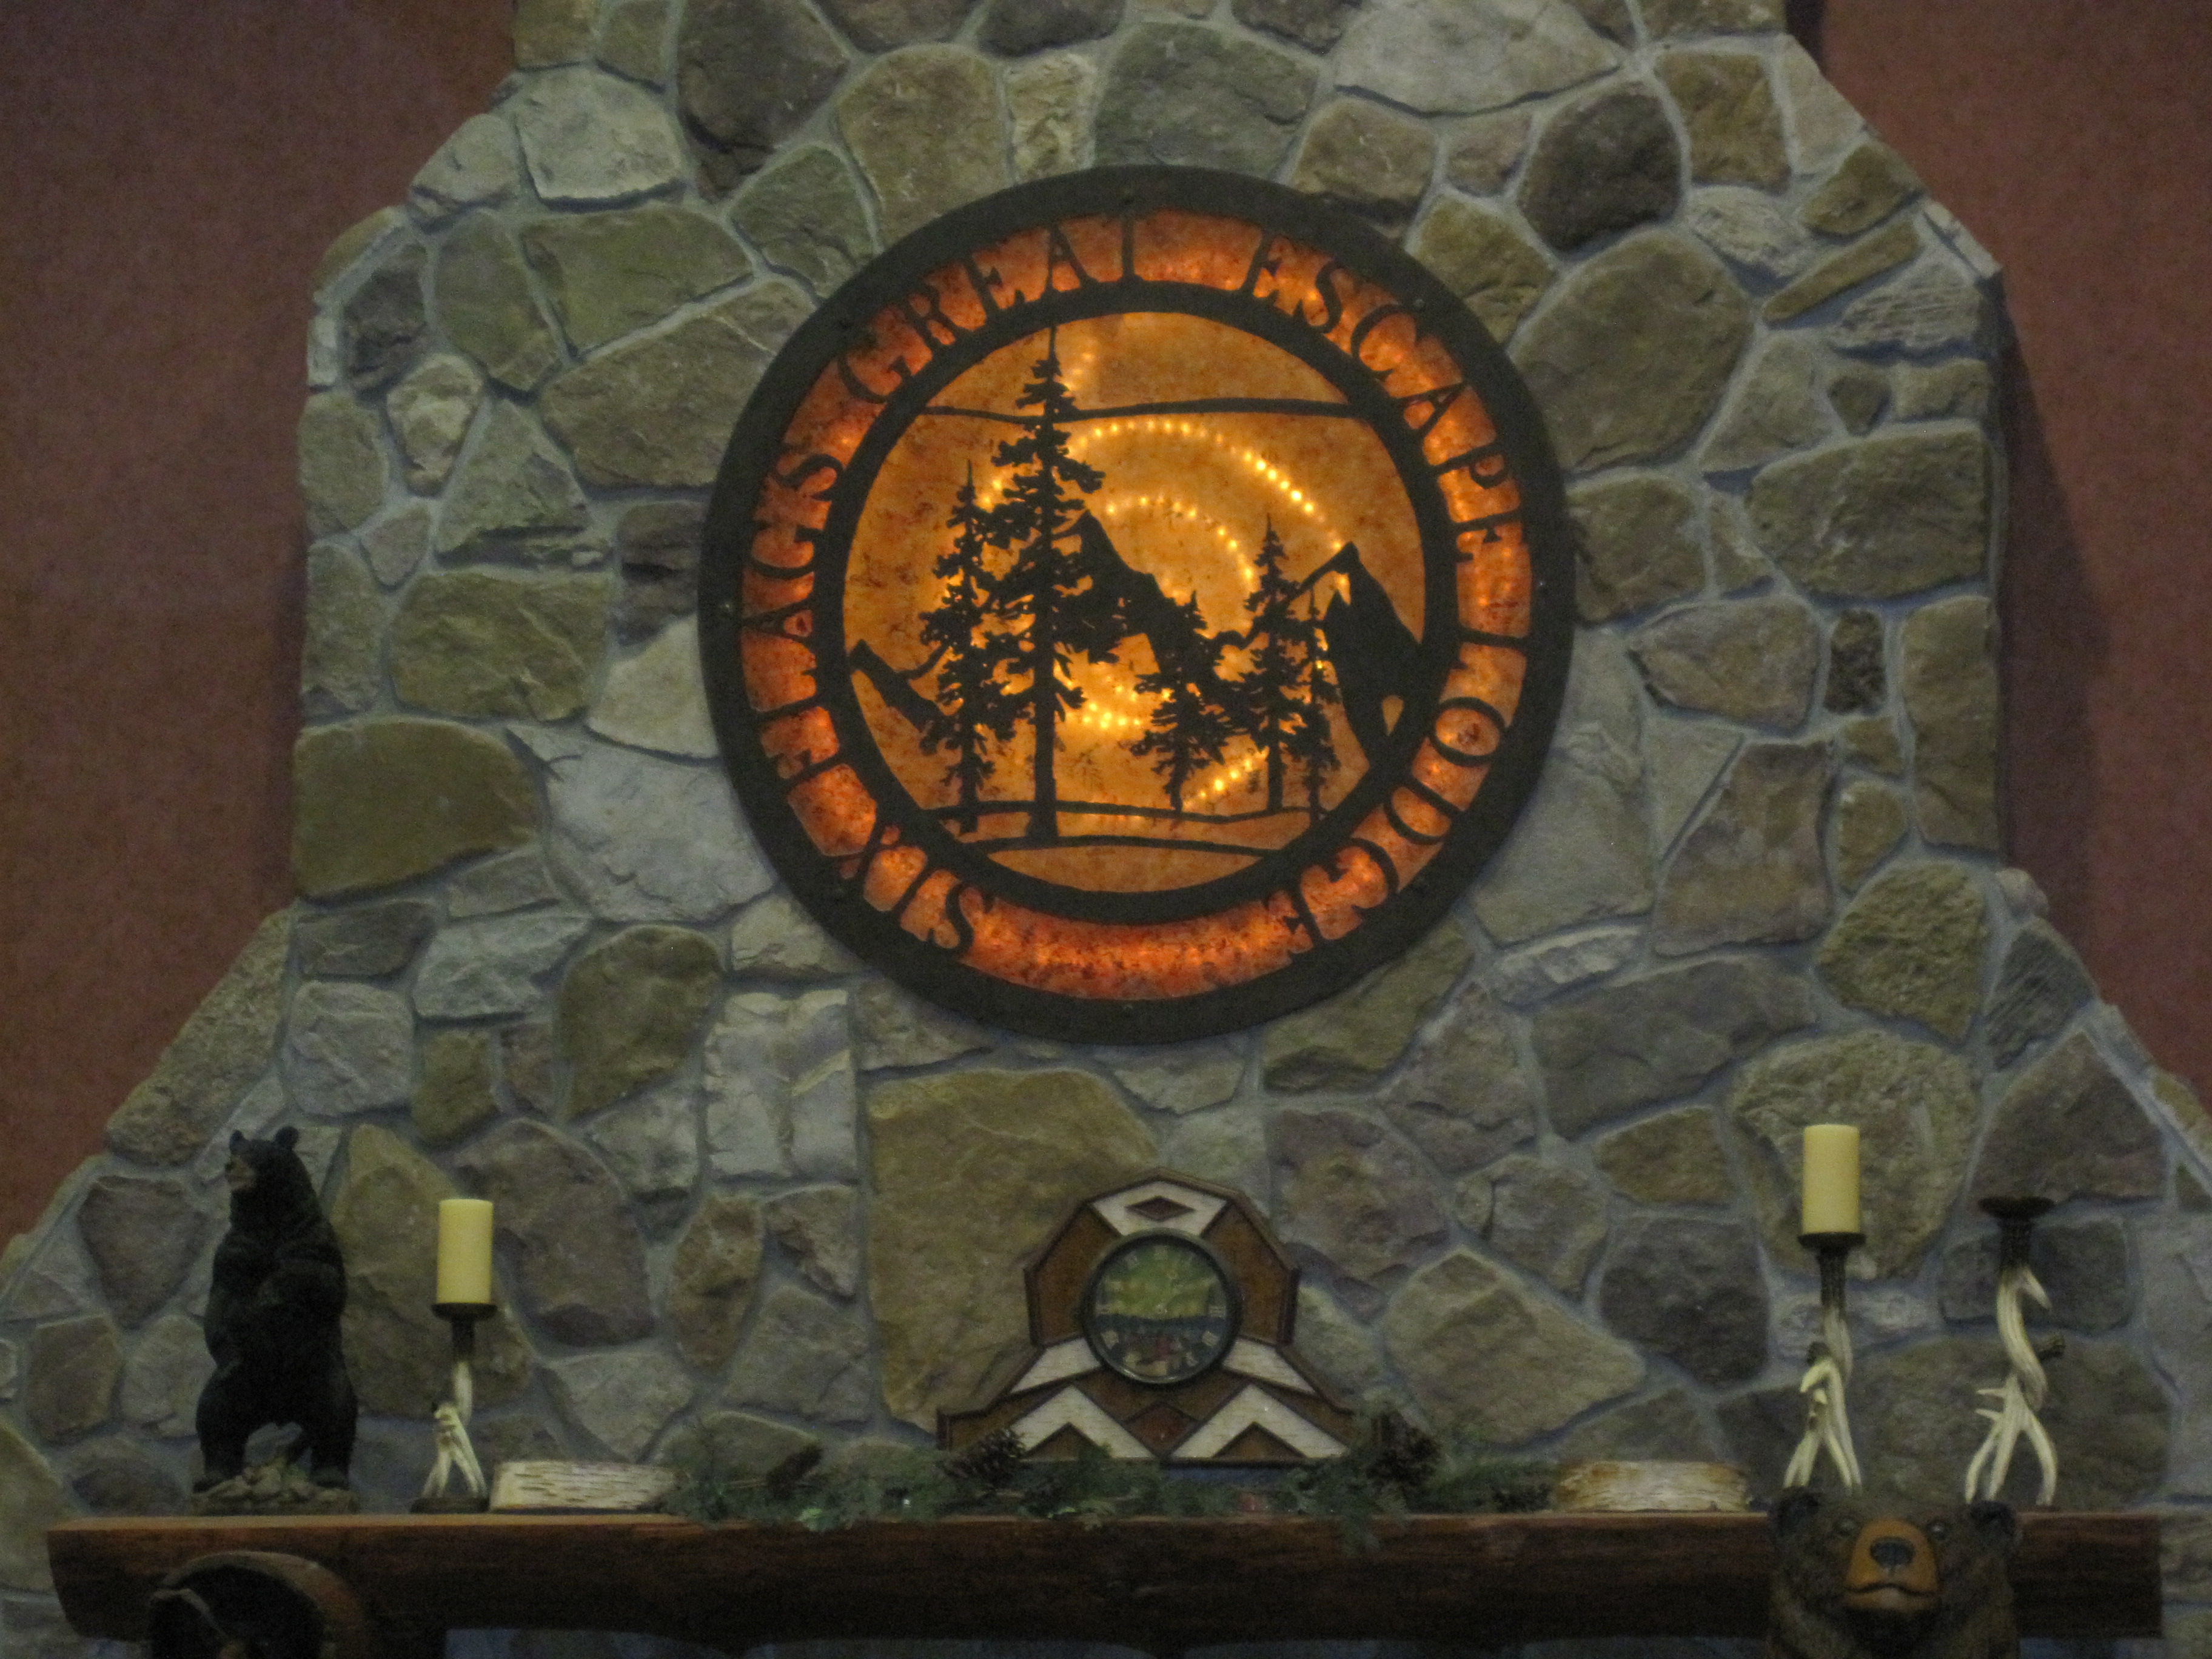 Picture of the mantle in the main lobby of the Great Escape Lodge, Queensbury, NY